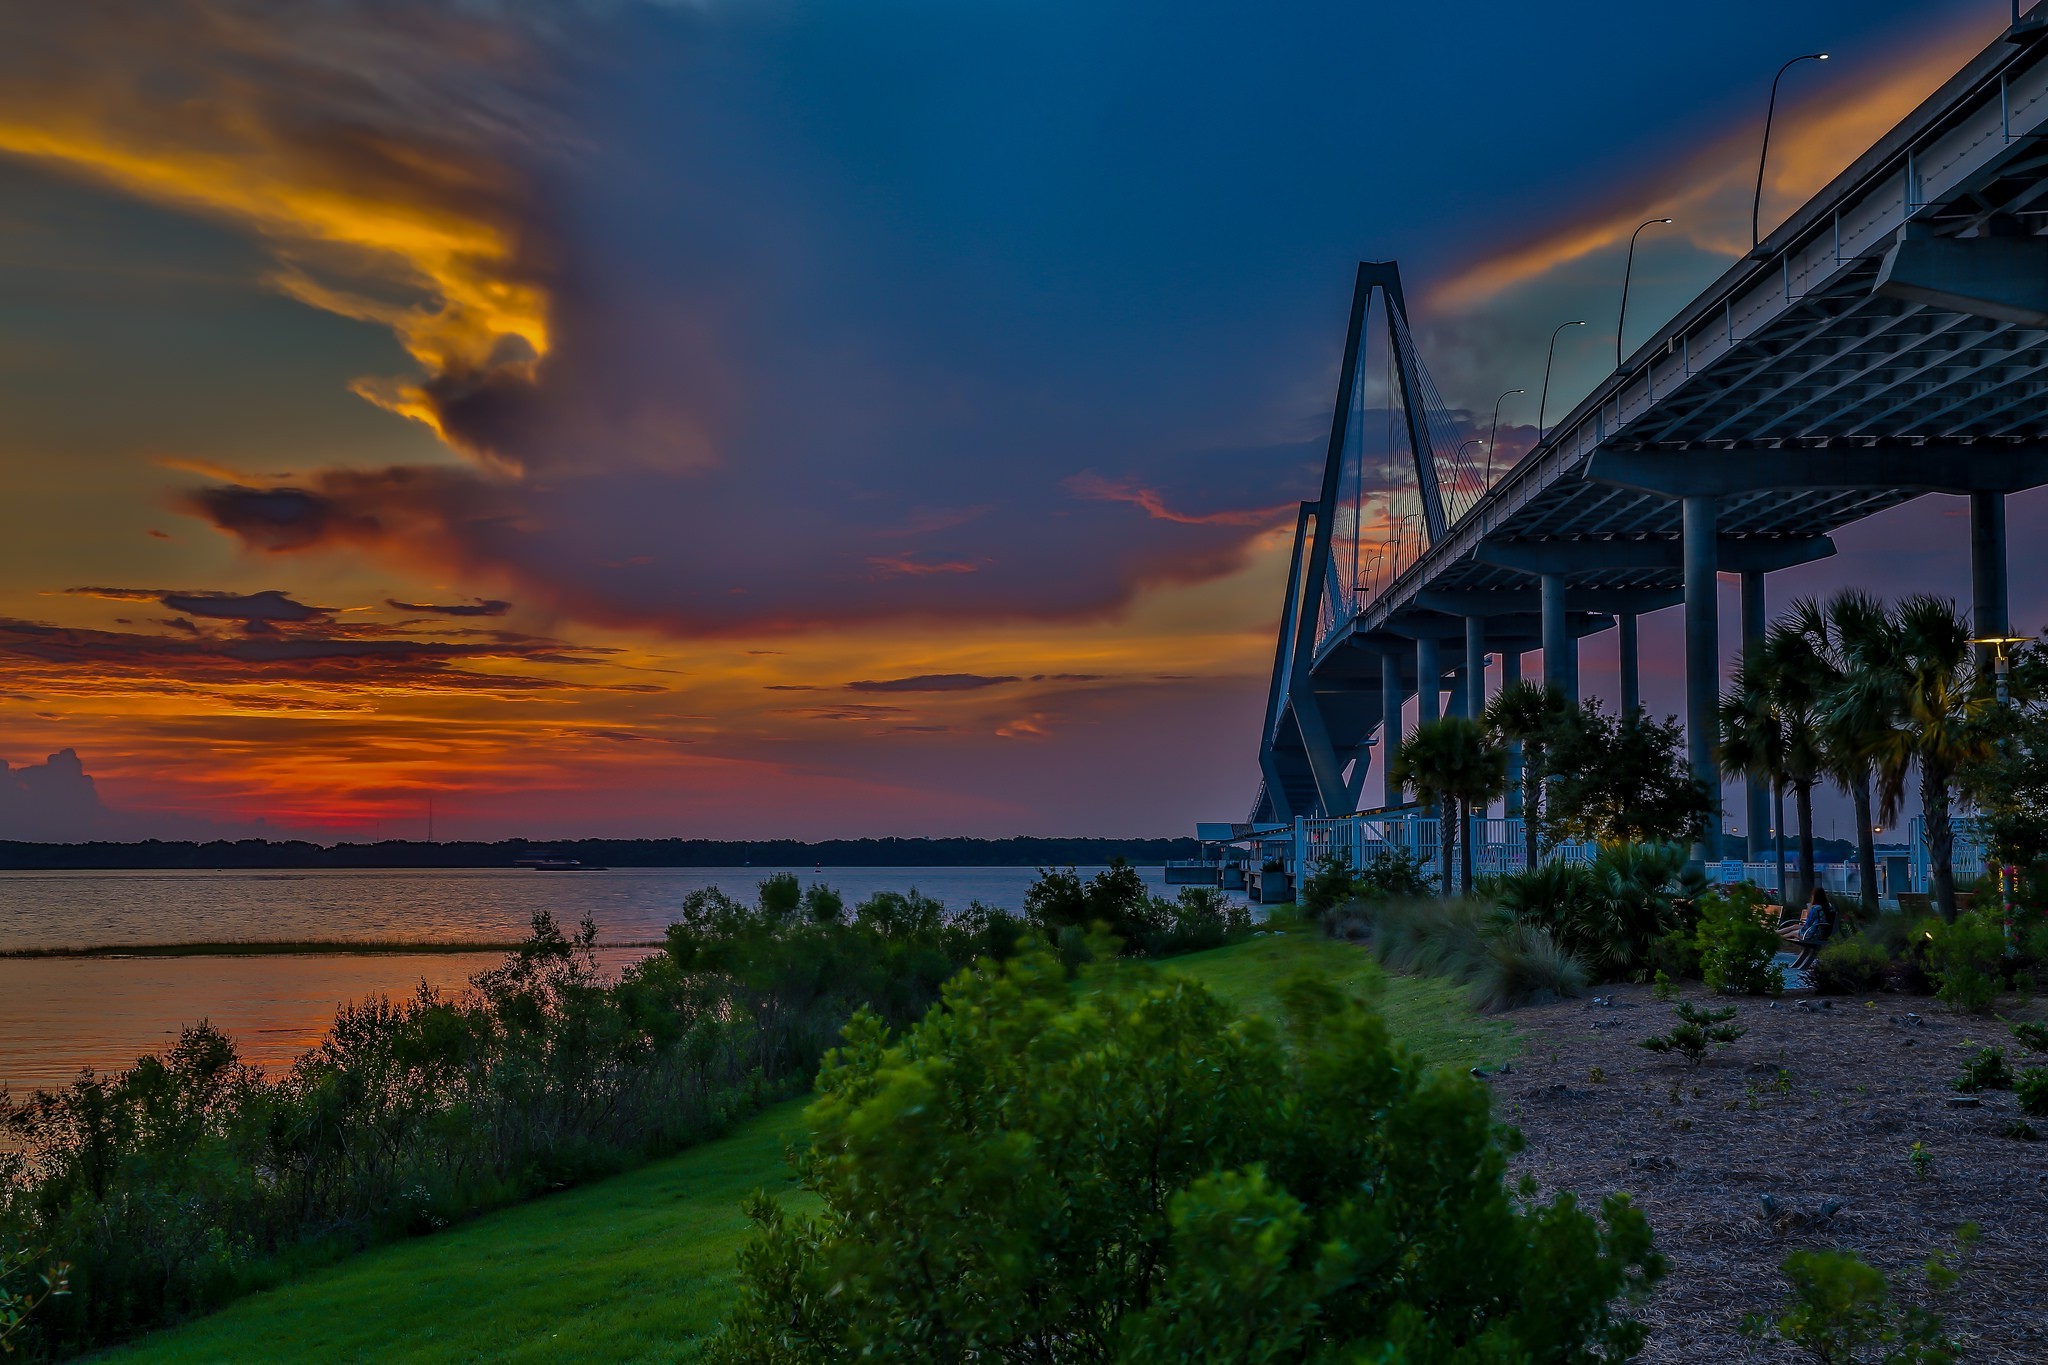 New Wallpaper – Sunset at Harbor Town | Tom Dills Photography Blog